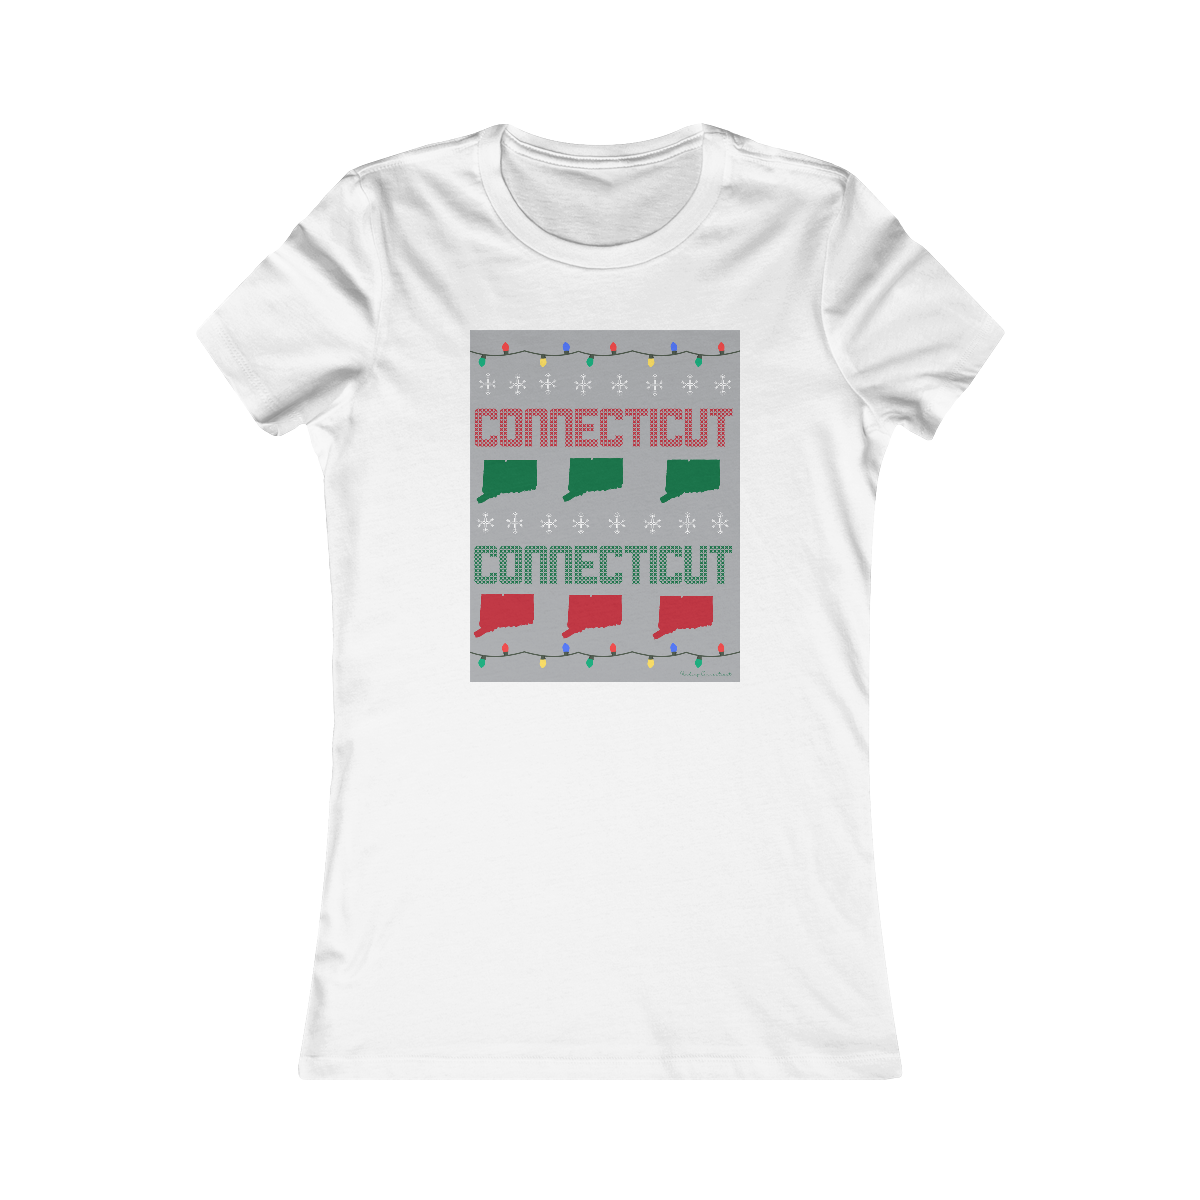 connecticut ugly holiday tee shirt womens 